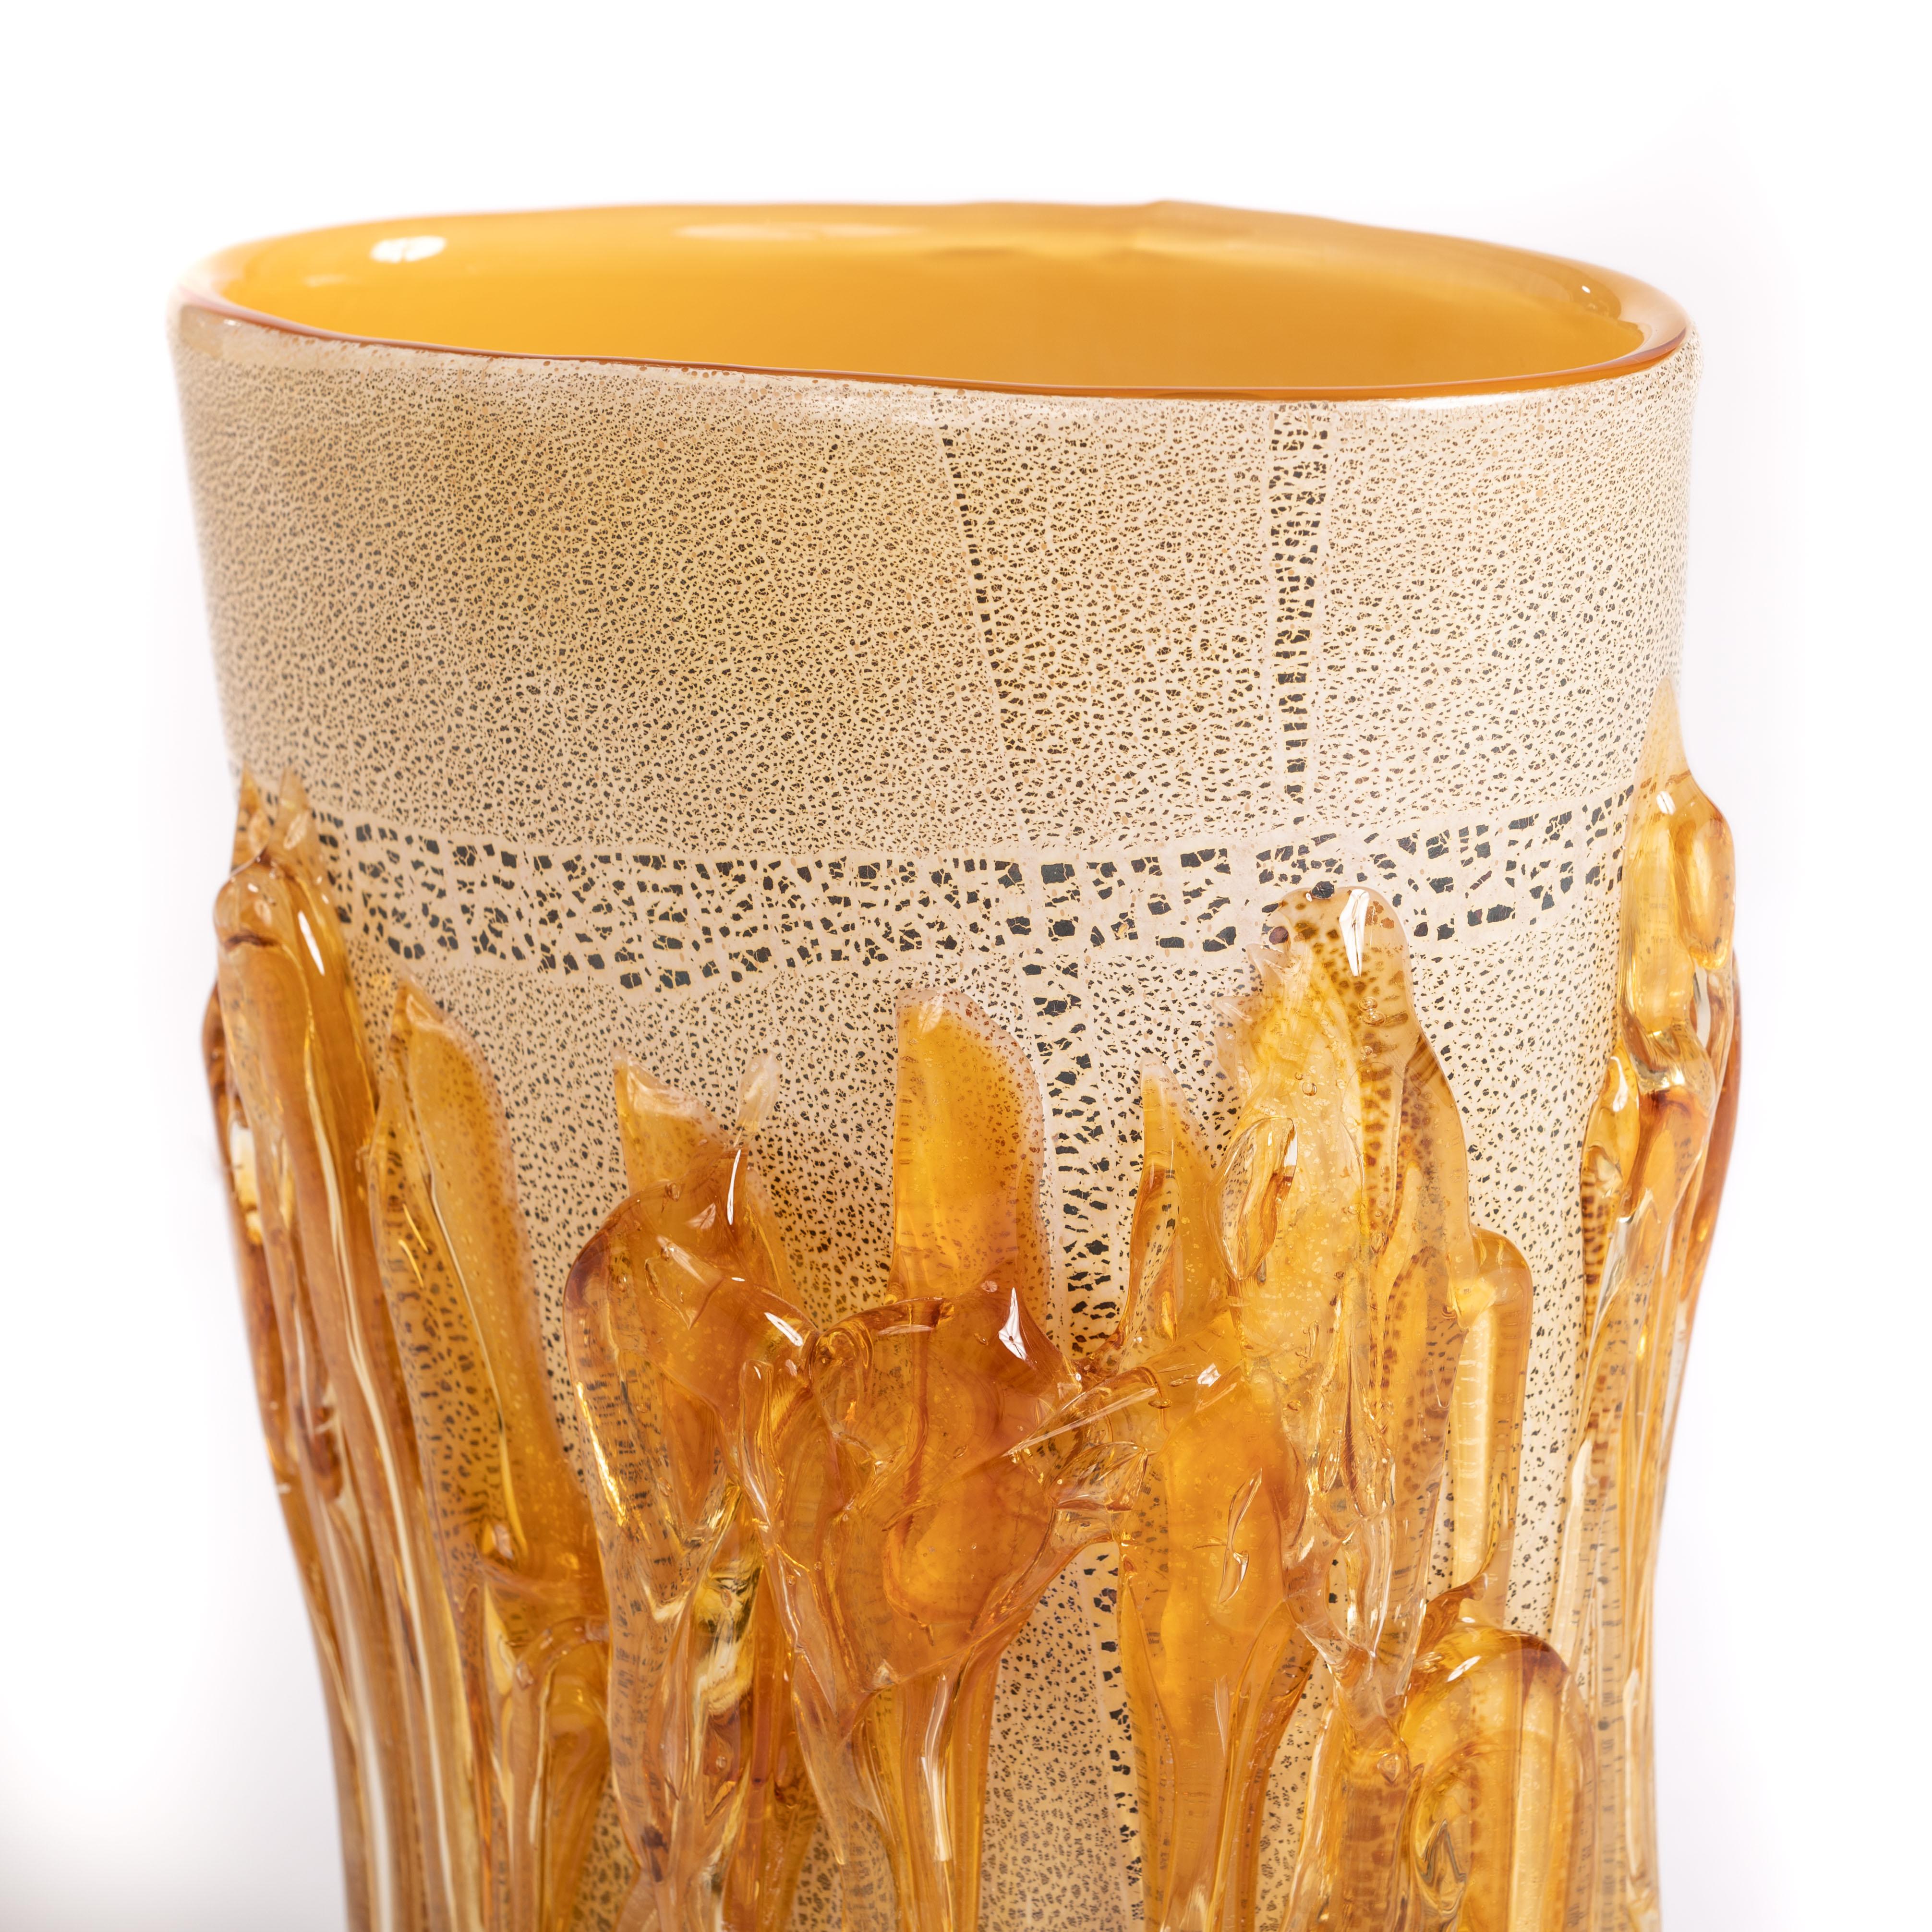 Italian Modern Murano Glass Vase in Gold-Amber Color signed by Hand, Italy 2015 For Sale